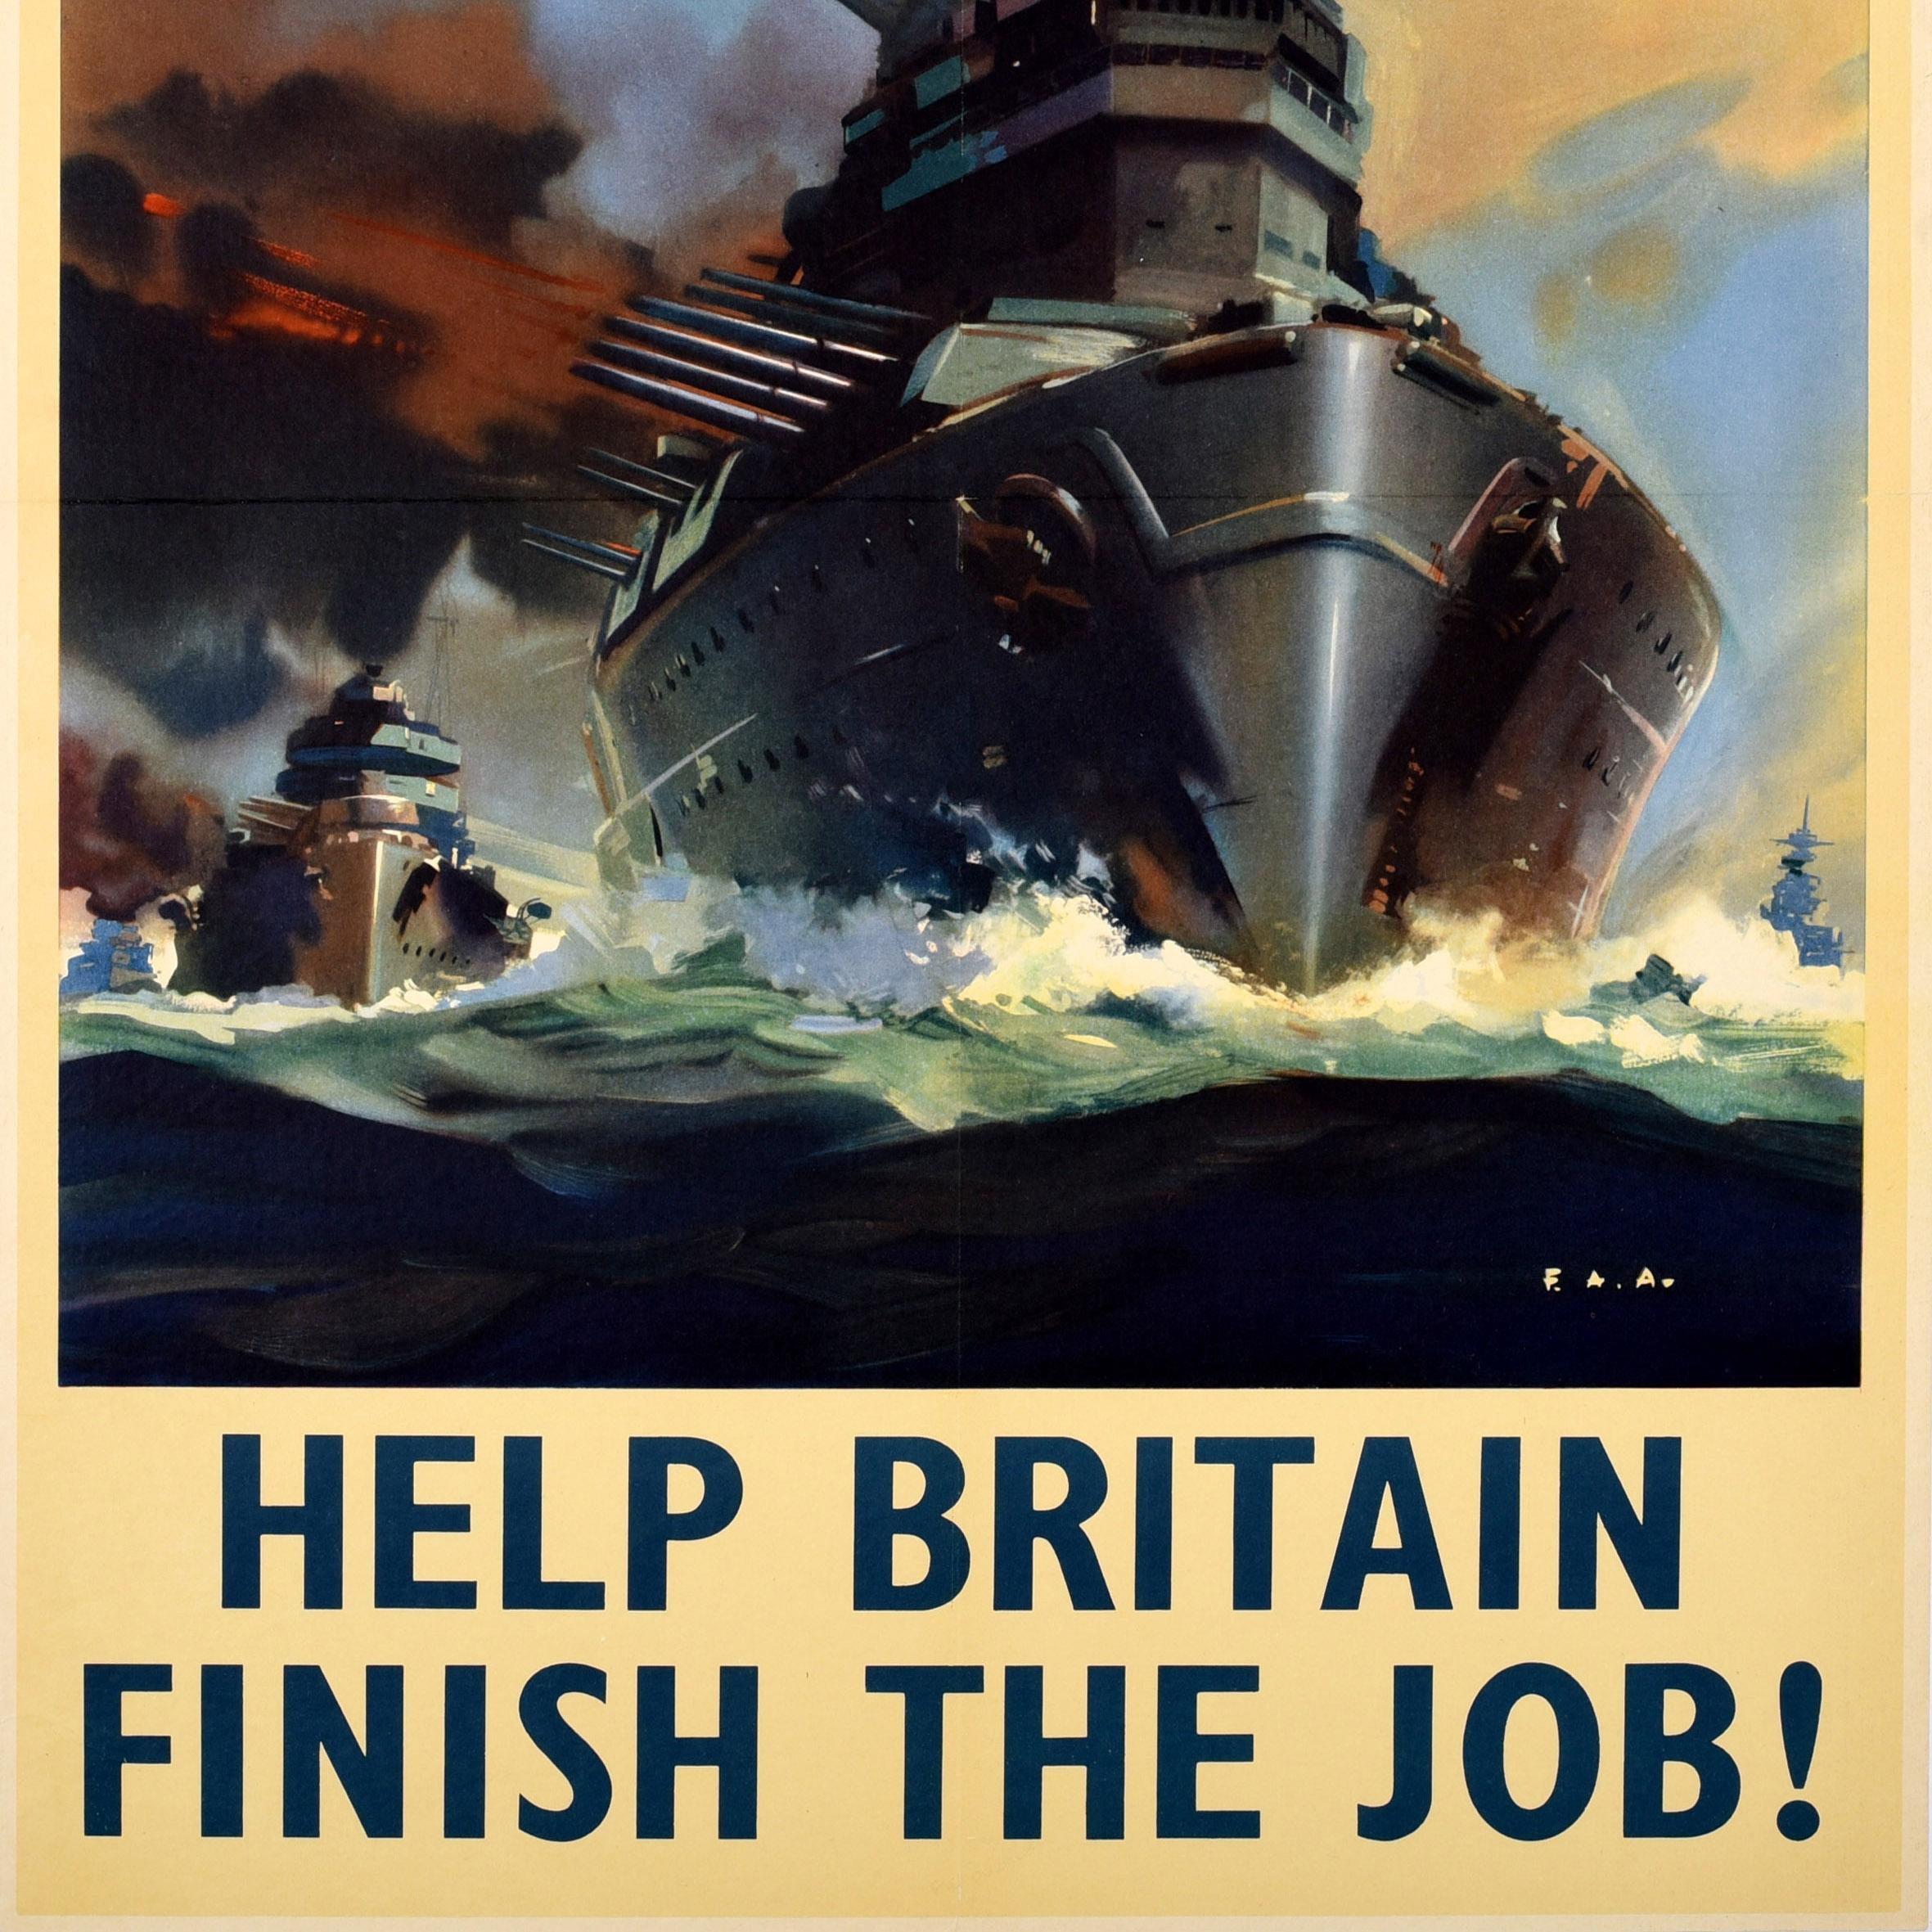 Original vintage World War Two propaganda poster - Help Britain Finish the Job! - featuring dynamic artwork depicting a warship at sea crashing through waves towards the viewer and shooting guns smoking from the cannons on the side, with biplanes